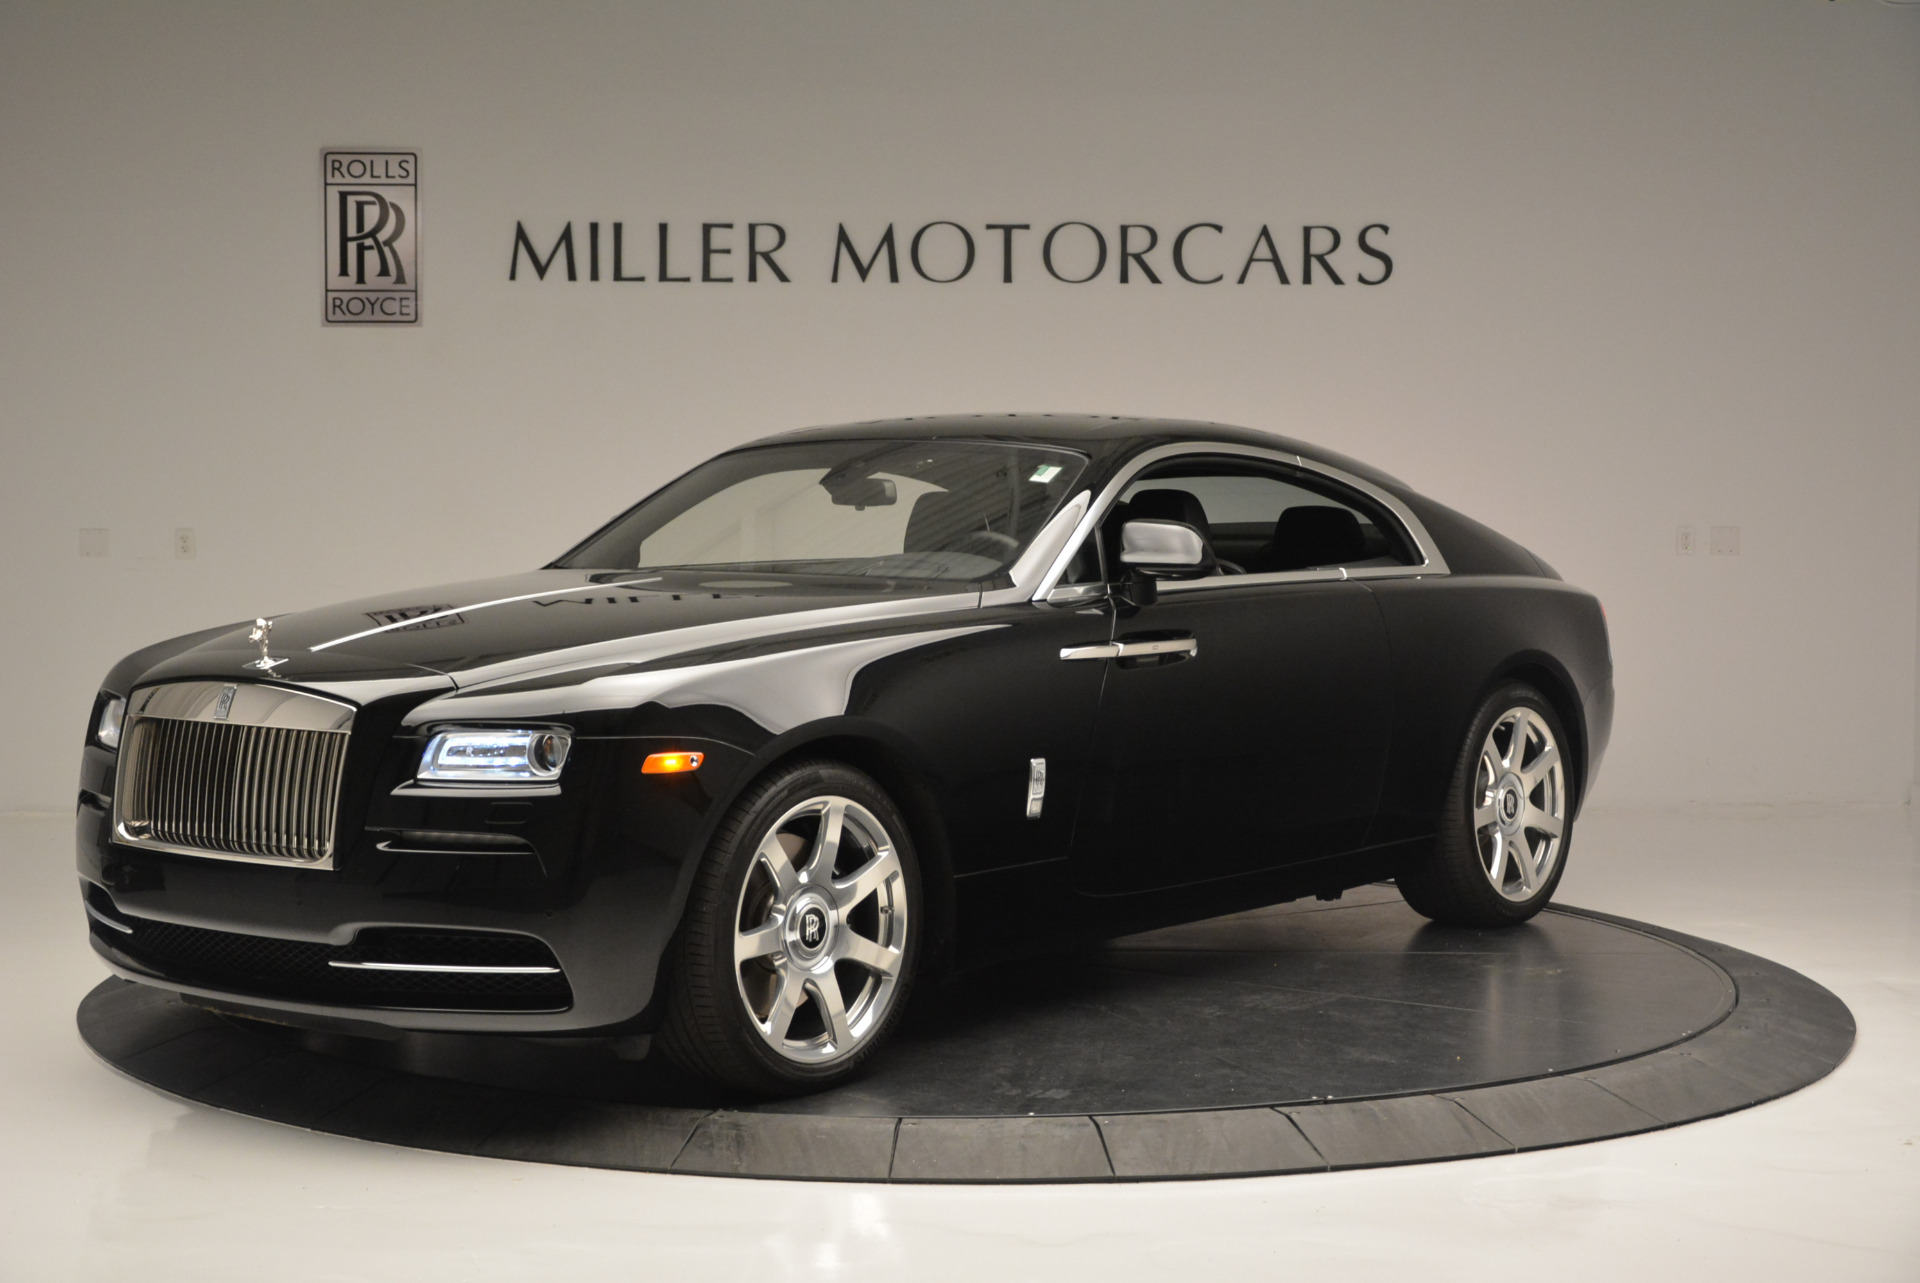 Used 2015 Rolls-Royce Wraith for sale Sold at Rolls-Royce Motor Cars Greenwich in Greenwich CT 06830 1